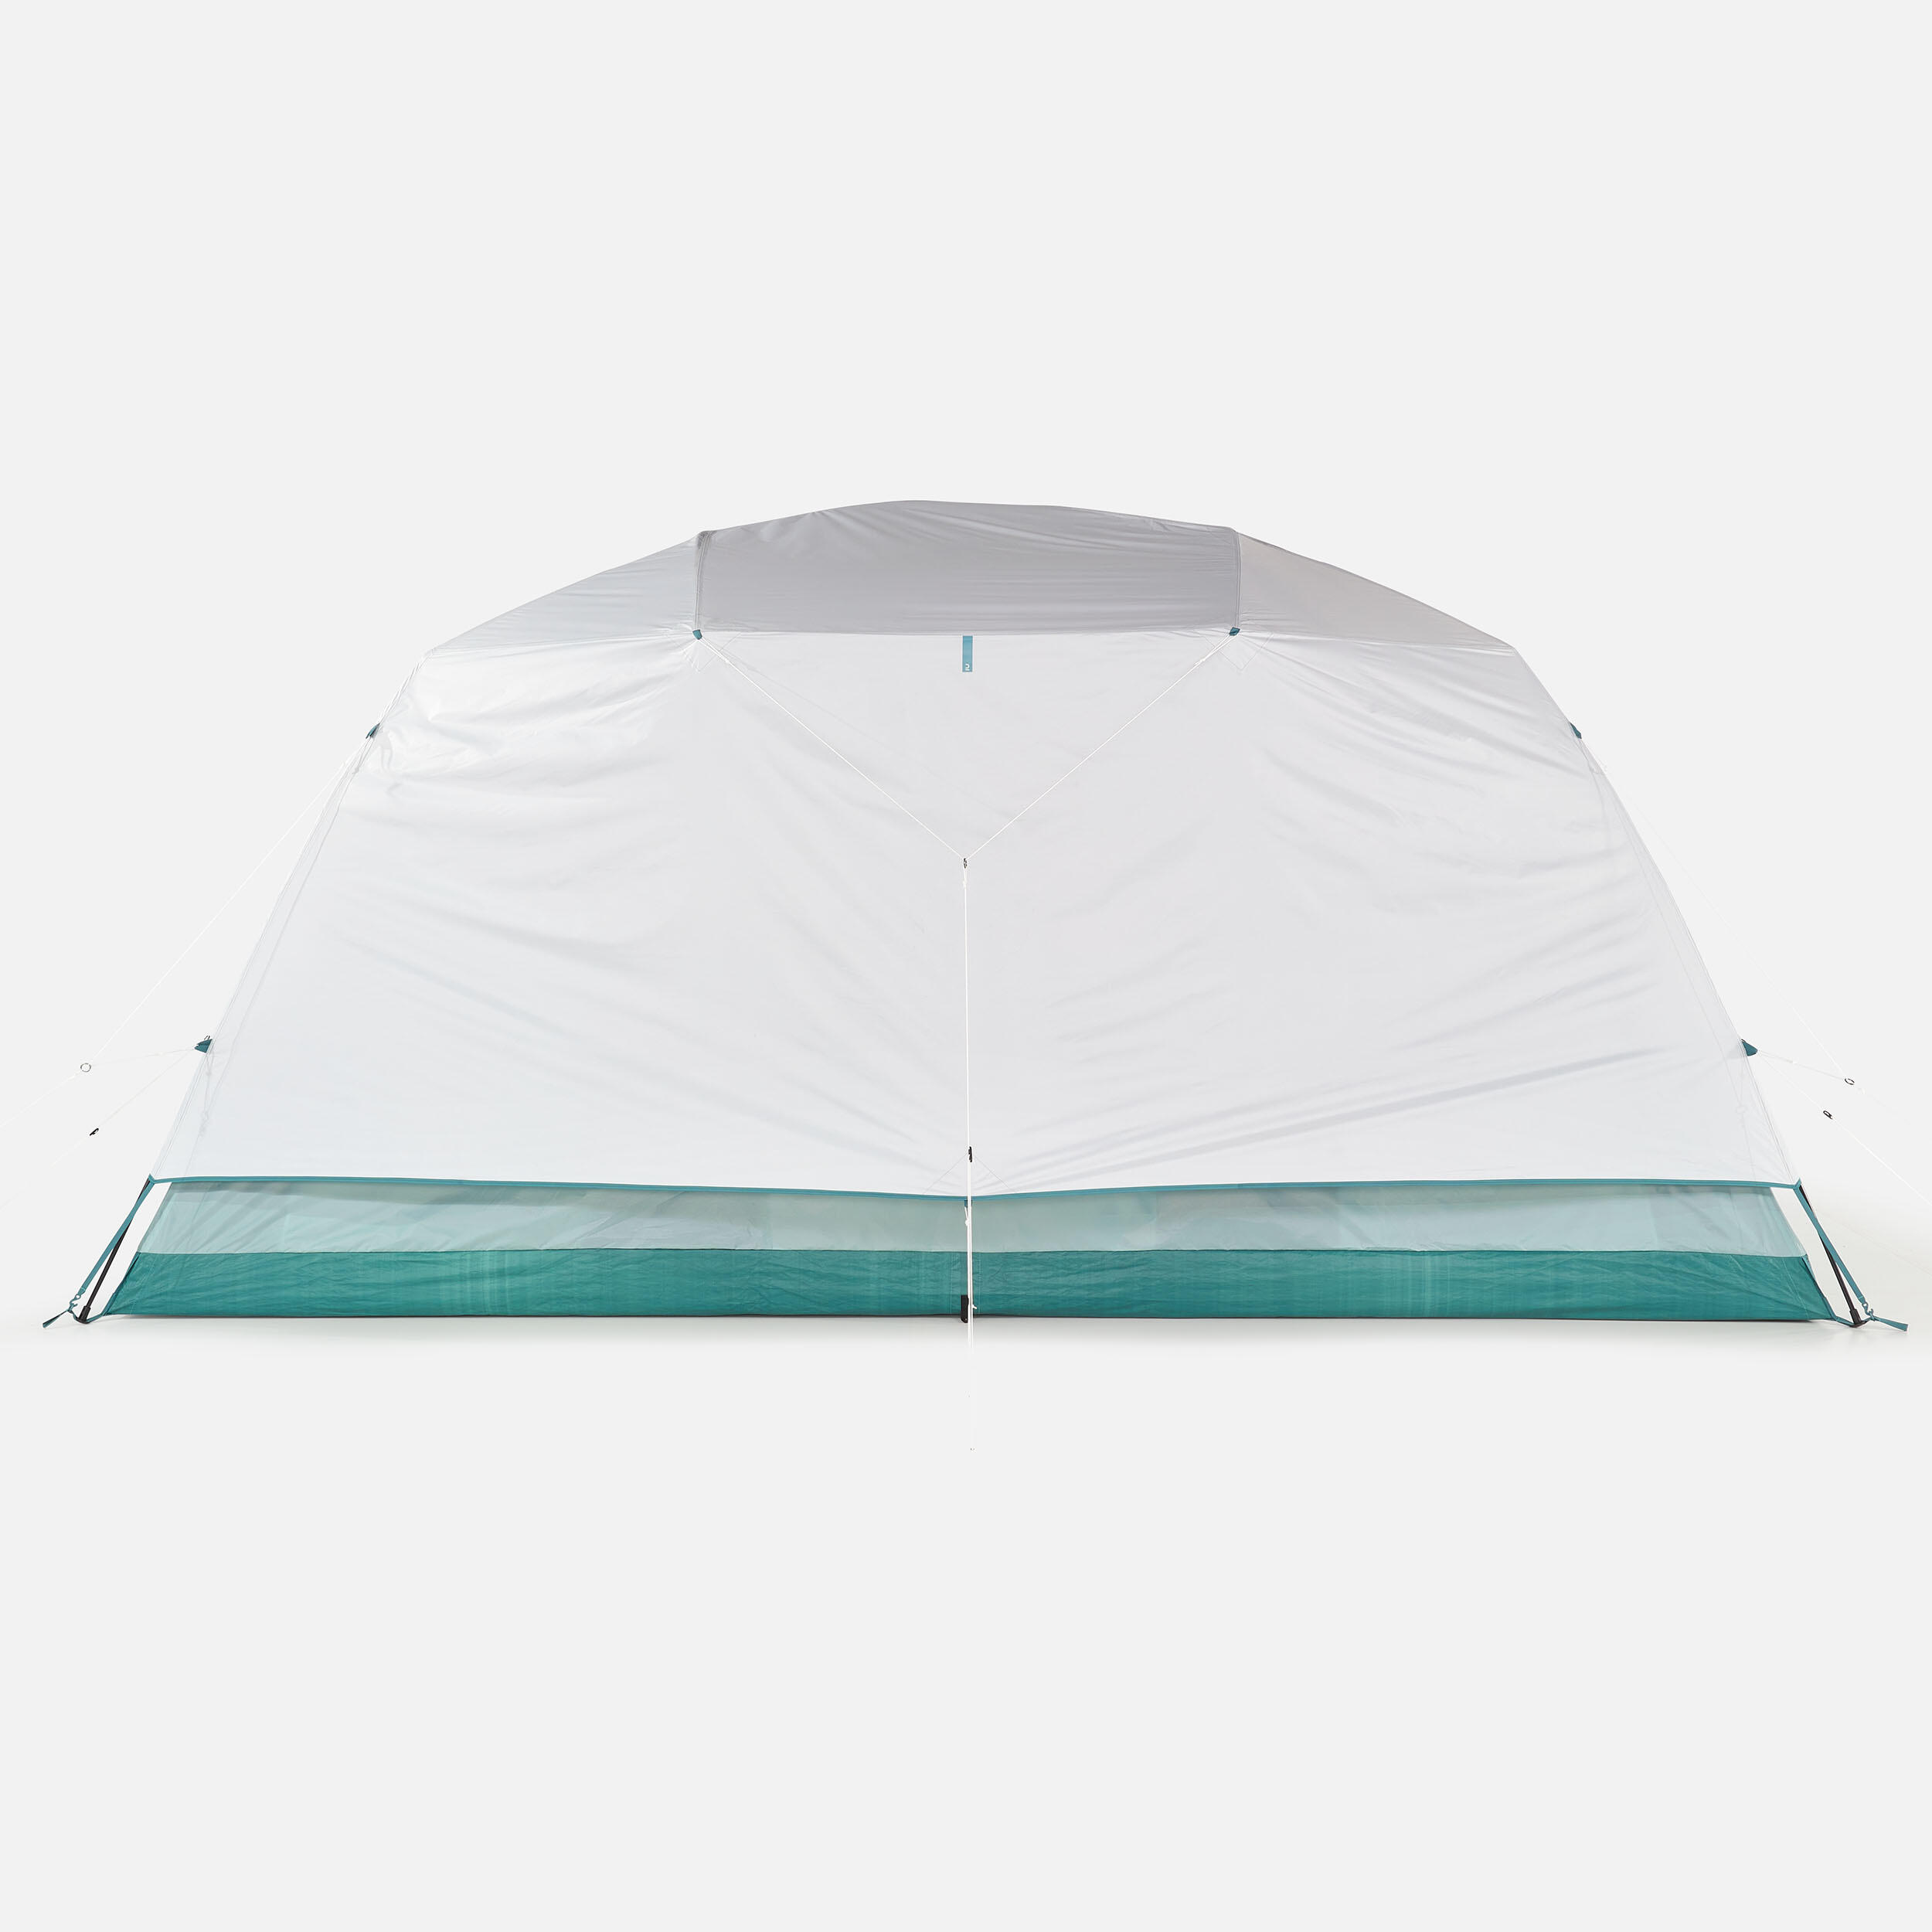 Camping tent with poles - Arpenaz 6 ULTRAFRESH - 6 Person 11/19